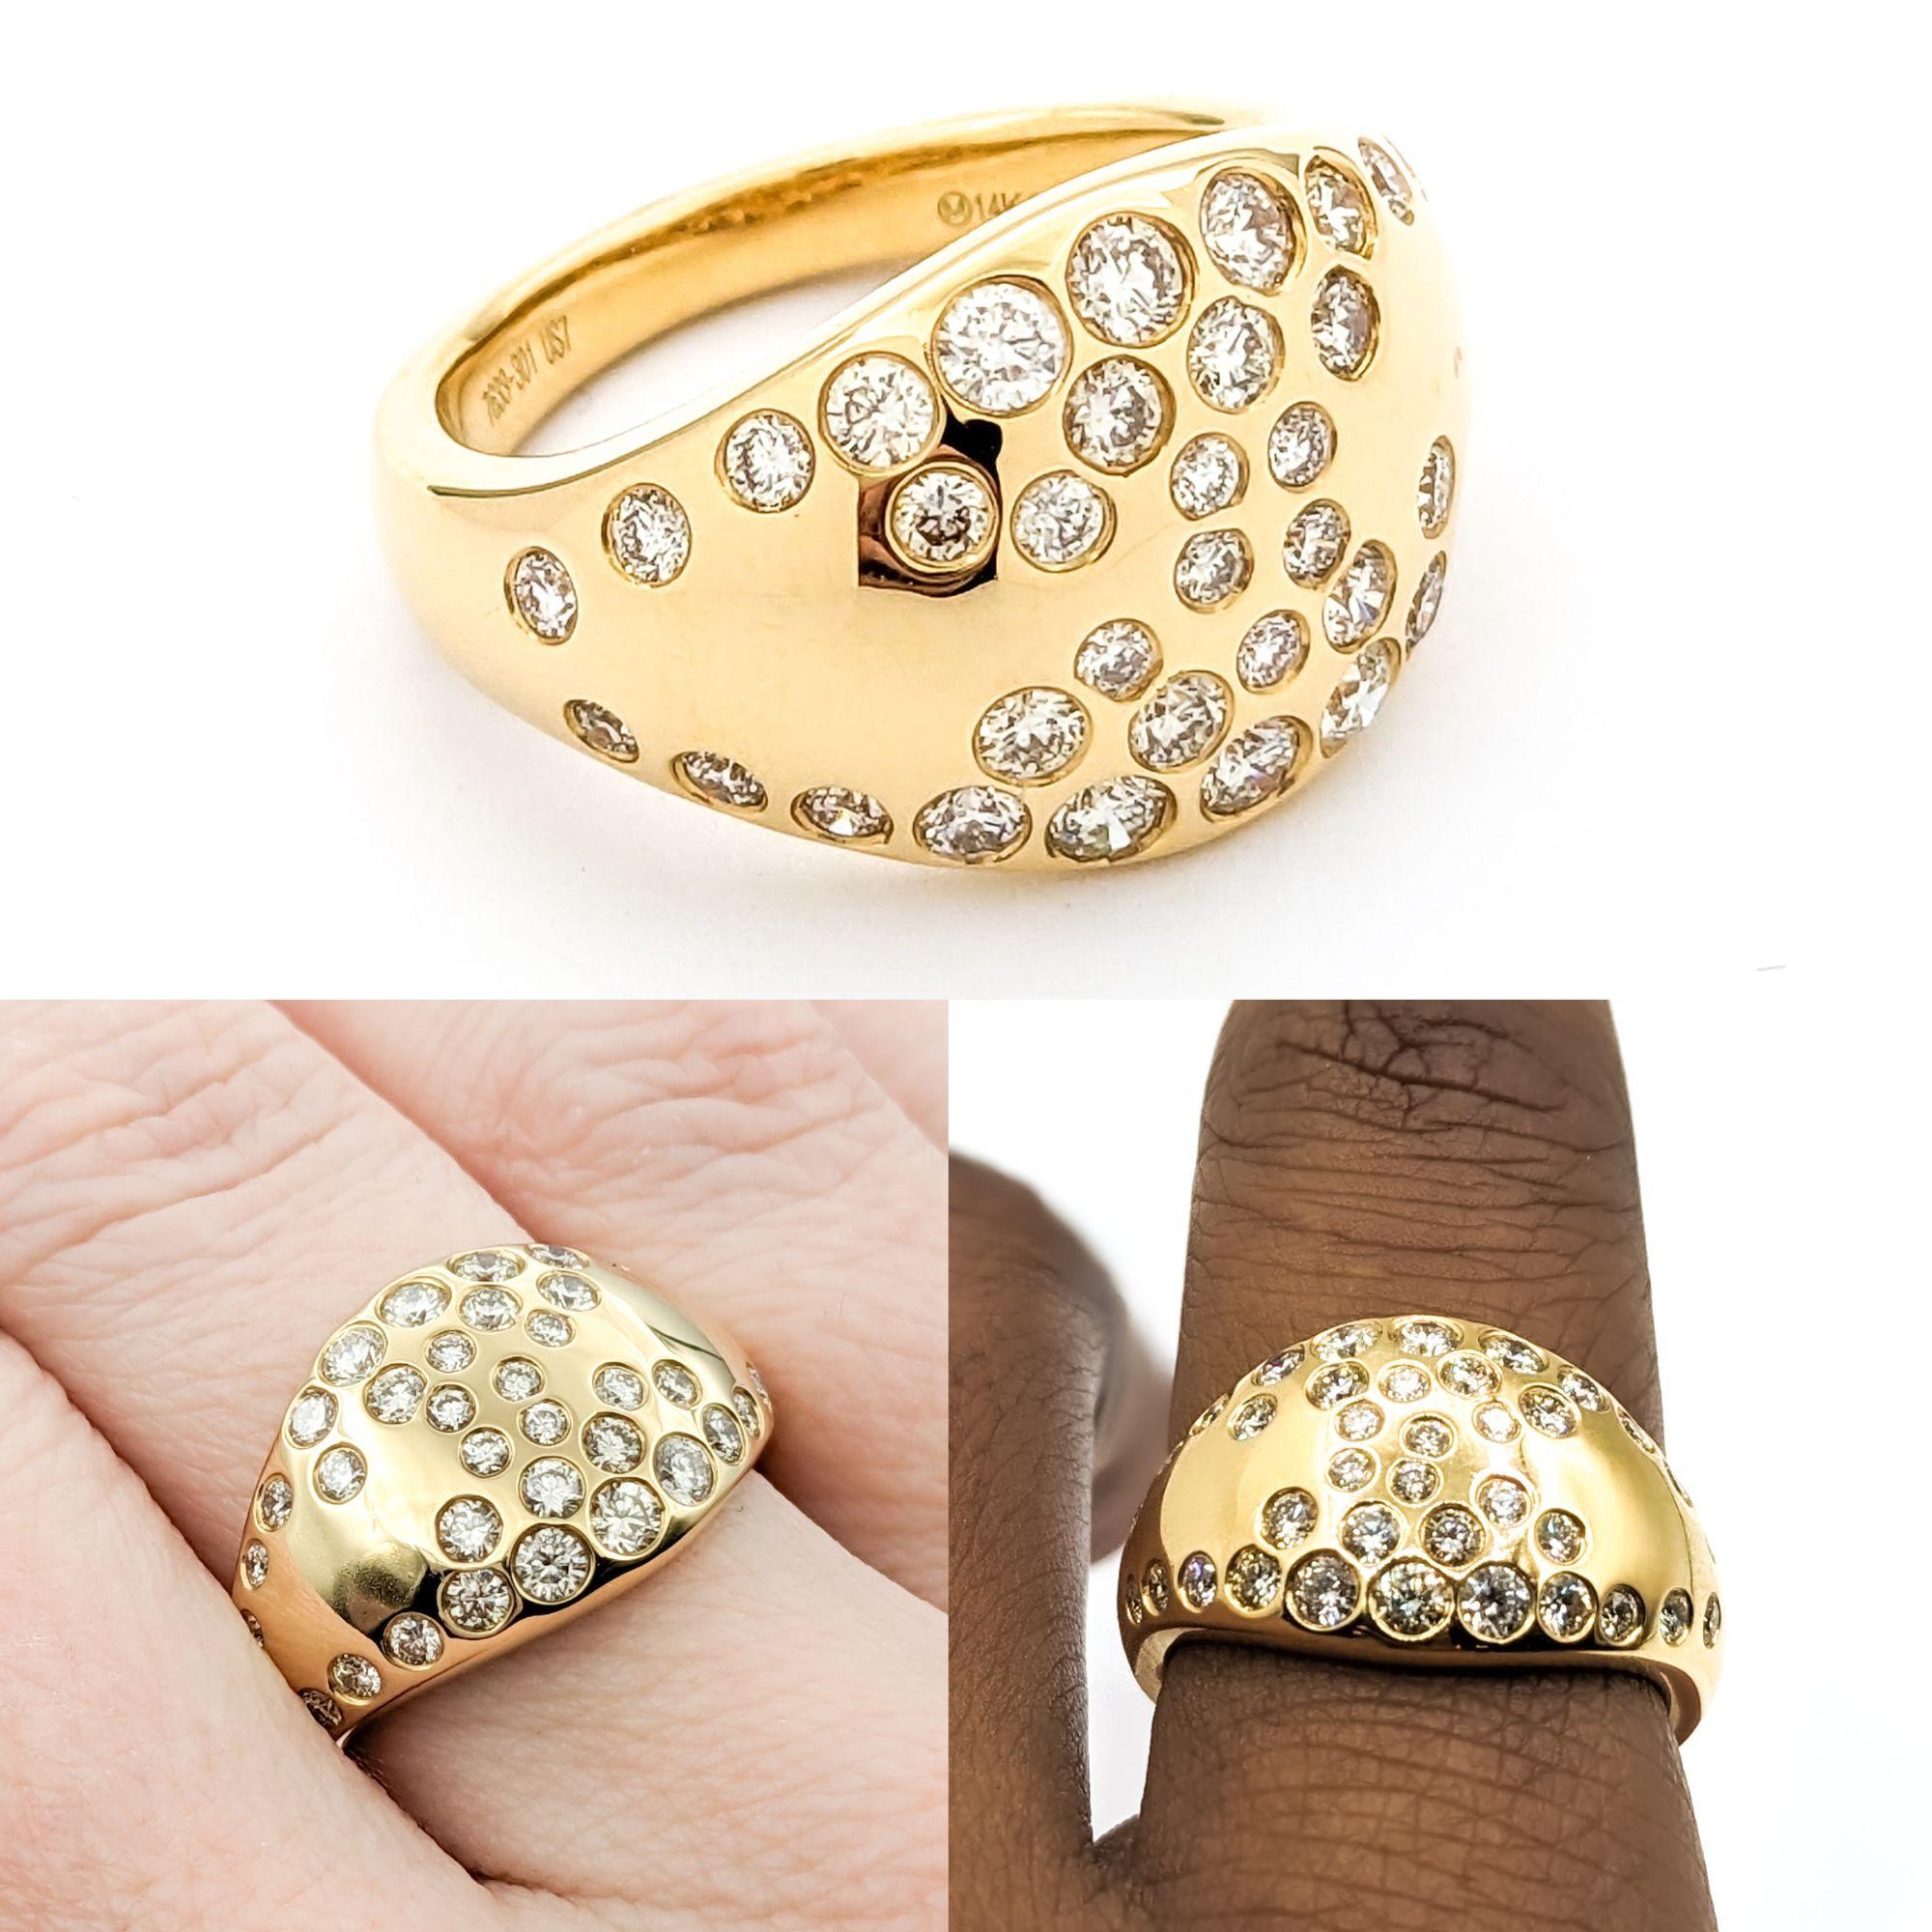 Unique Flush-Set Diamond Cocktail Ring

This stylish ring is crafted in 14kt yellow gold and features 1.08ctw round brilliant-cut diamonds, SI2-I1 clarity and I color. This ring is size 7 but can be adjusted upon request (for a fee); total weight is